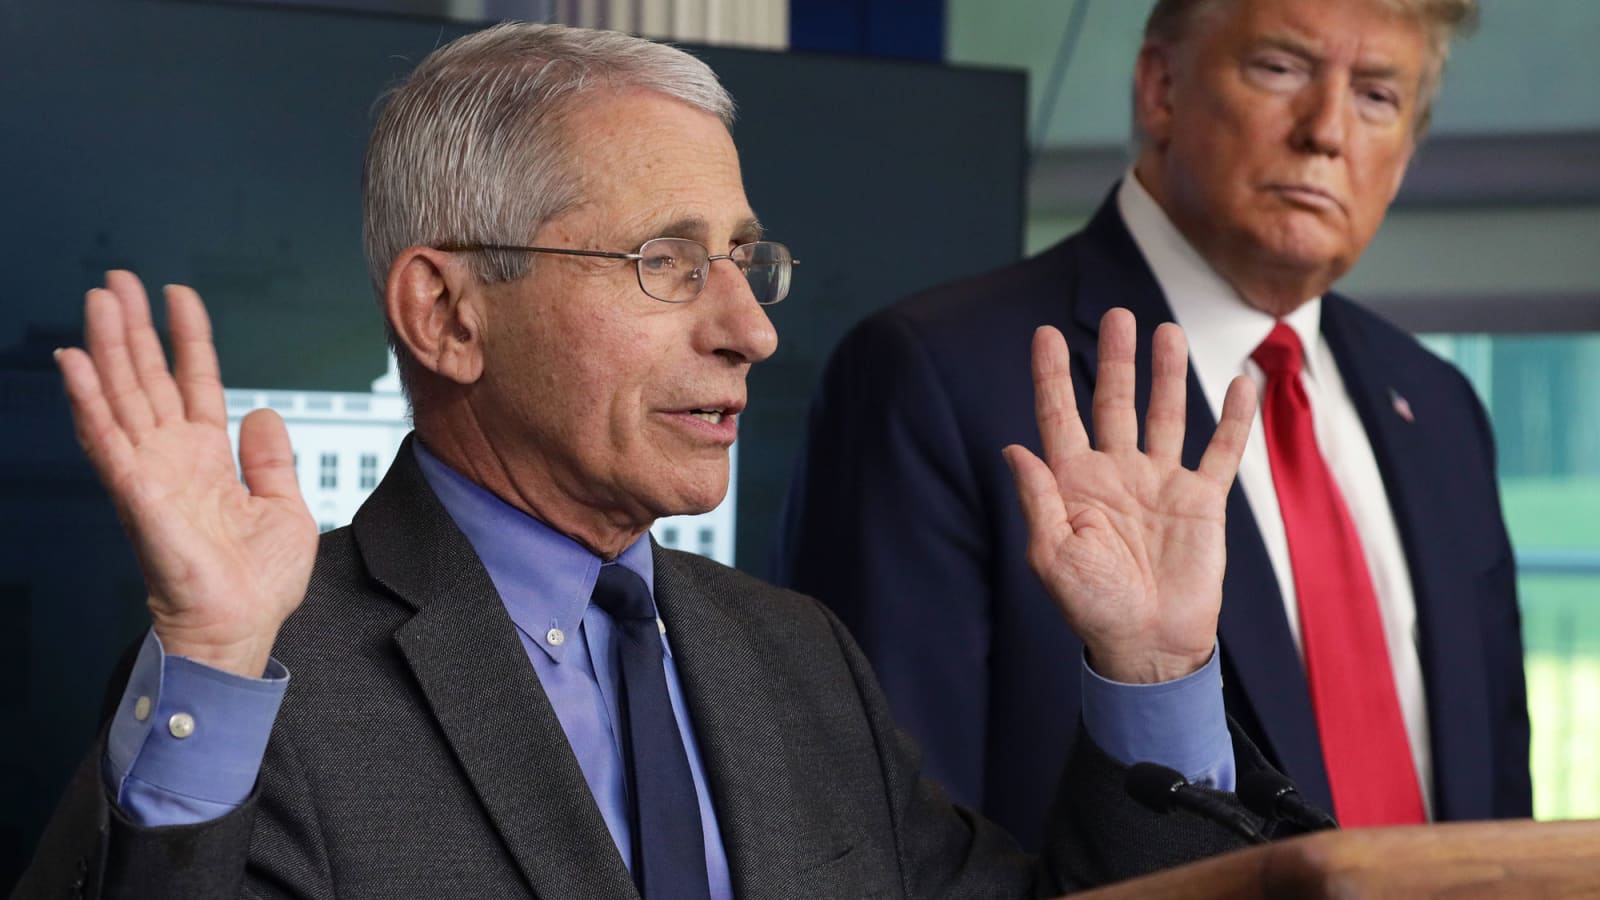 Coronavirus: Anthony Fauci clarifies comments that sparked firing ...